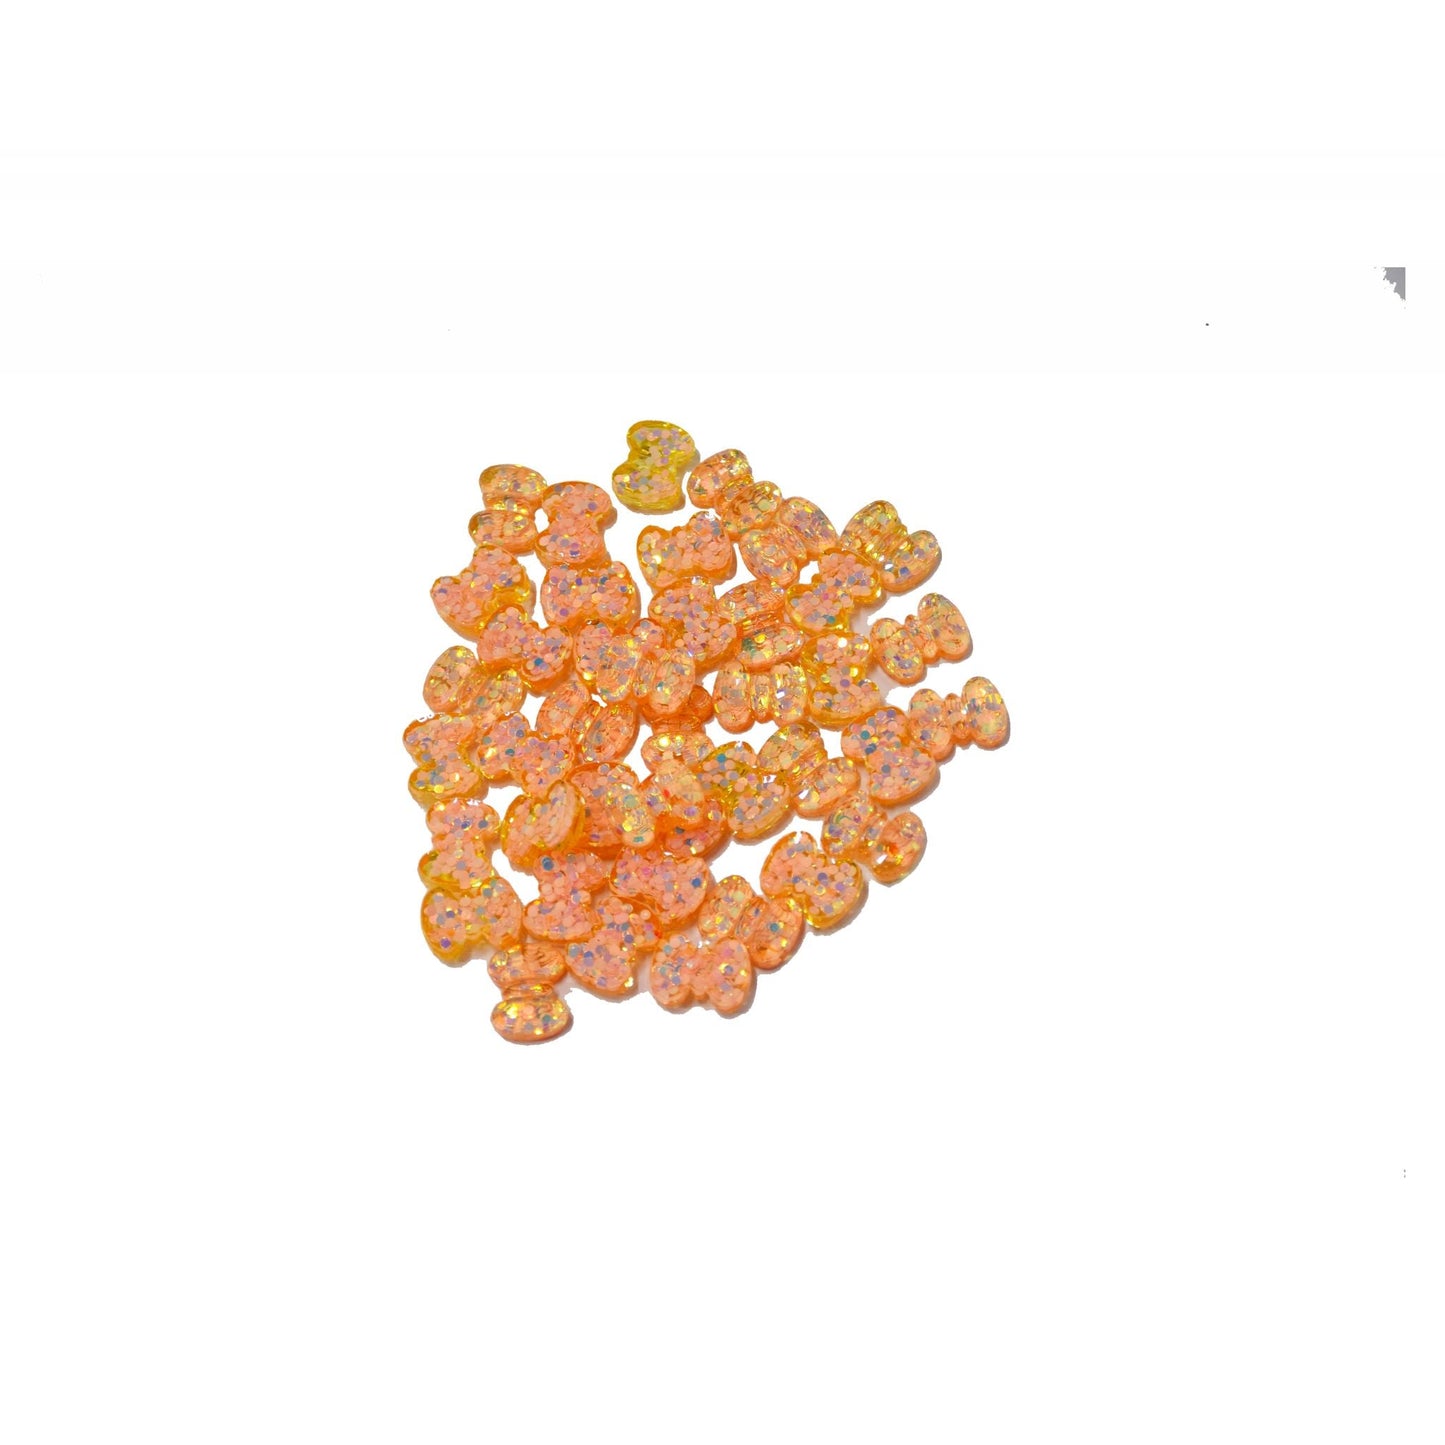 Indian Petals Small Resin Glittery Bow Flat-back Cabochons Motif for Craft Decoration or Rakhi - 12449, Glittery  Peach